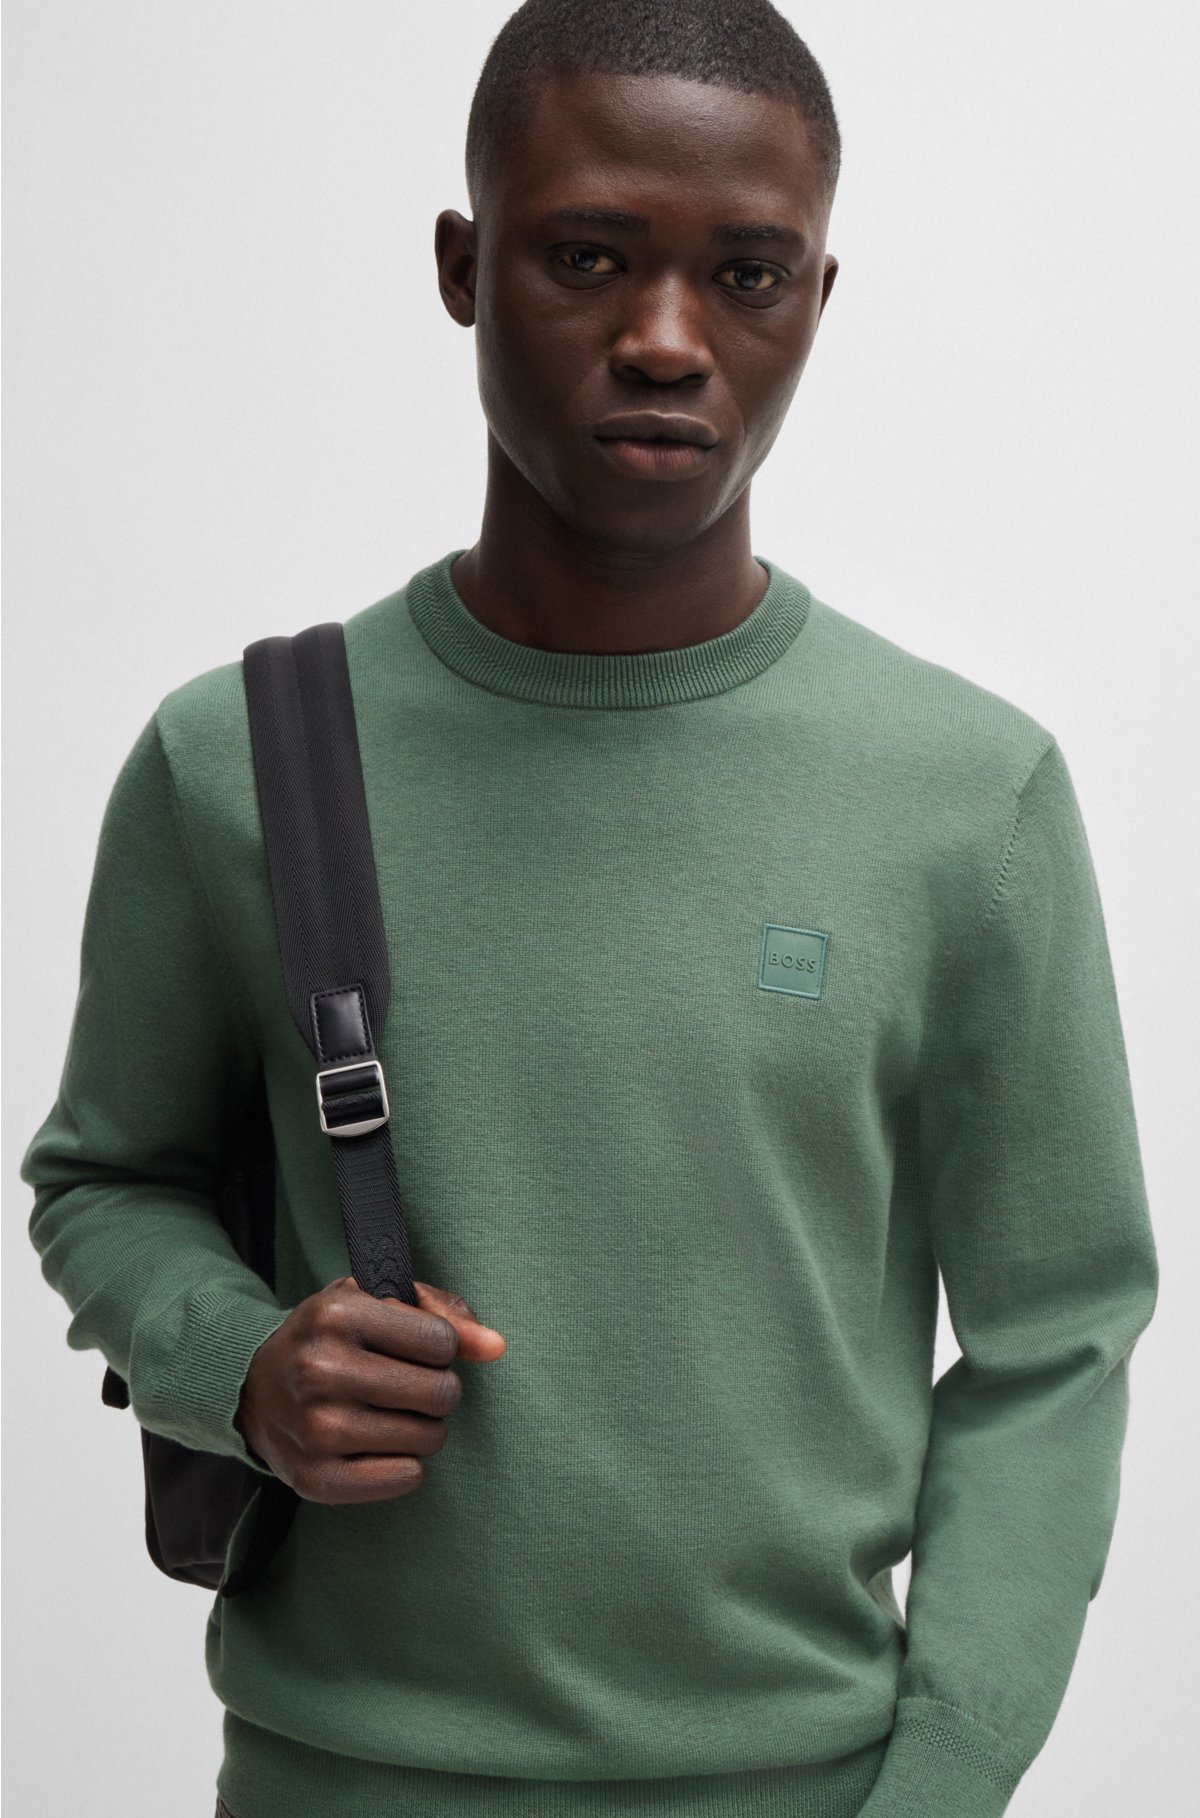 Crew-neck sweater in cotton and cashmere with logo, Green